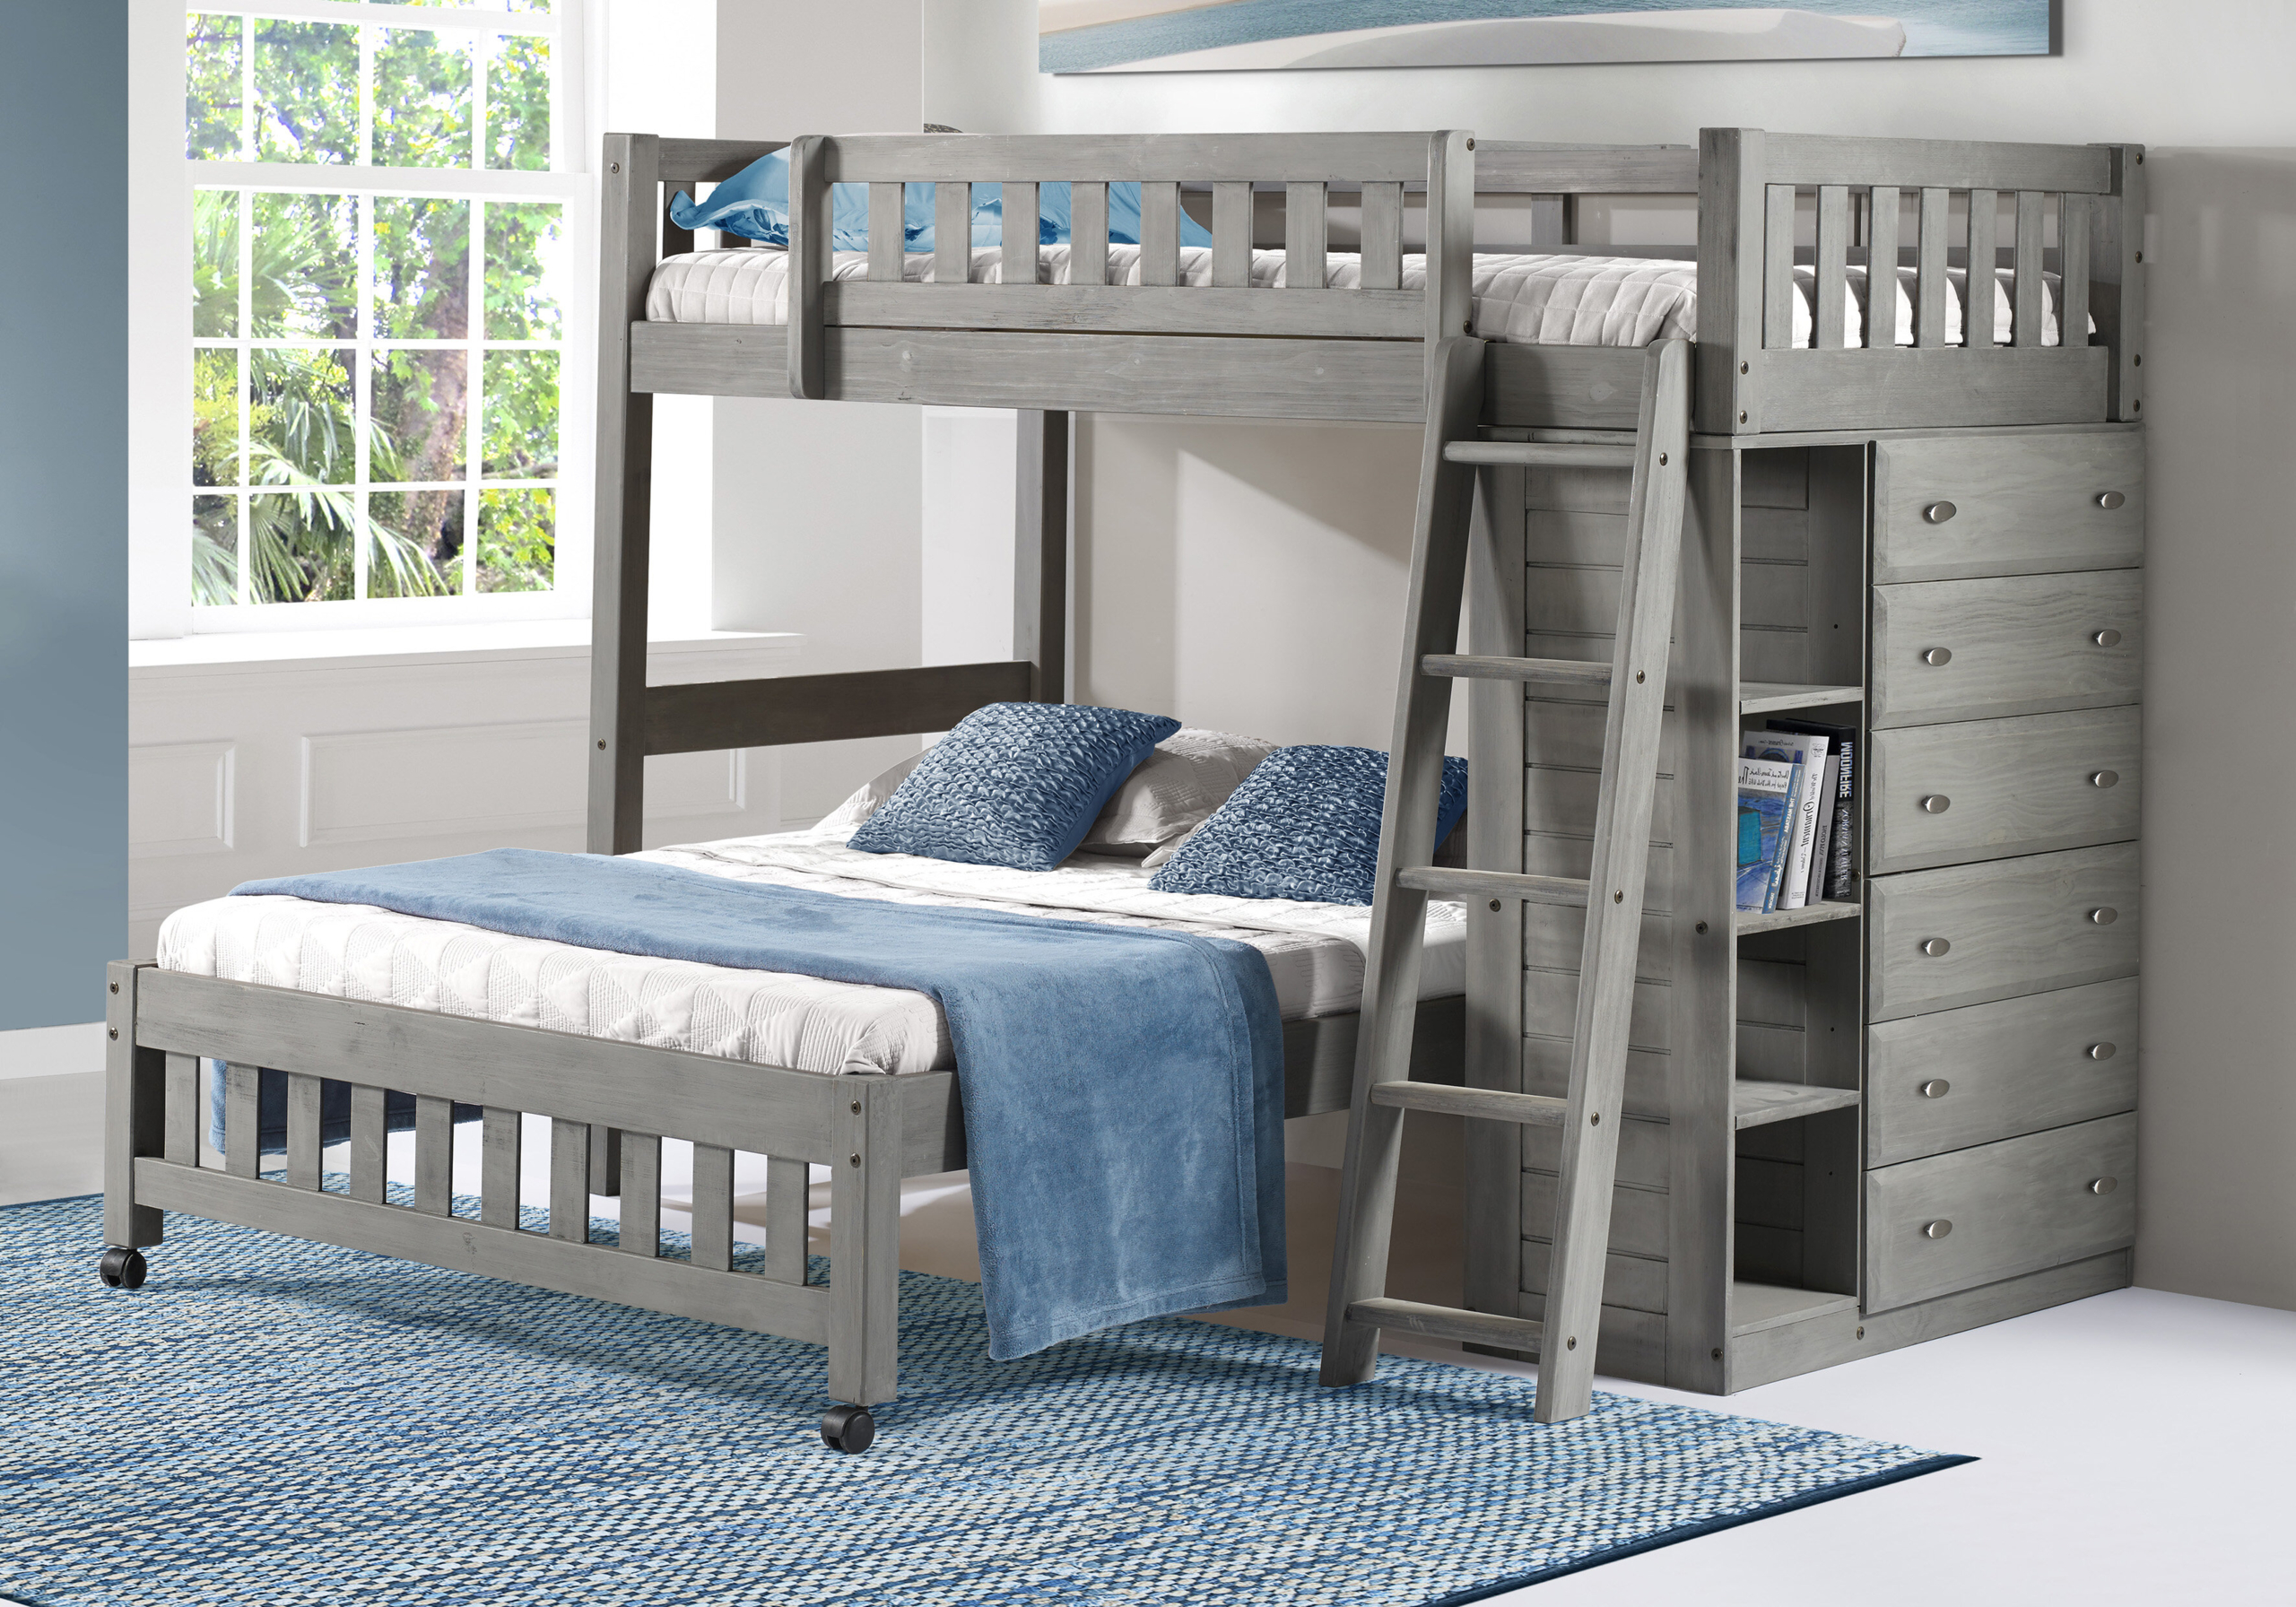 Bunk Beds With Dressers Visualhunt, Twin Over Full Bunk Bed With Stairs And Dresser